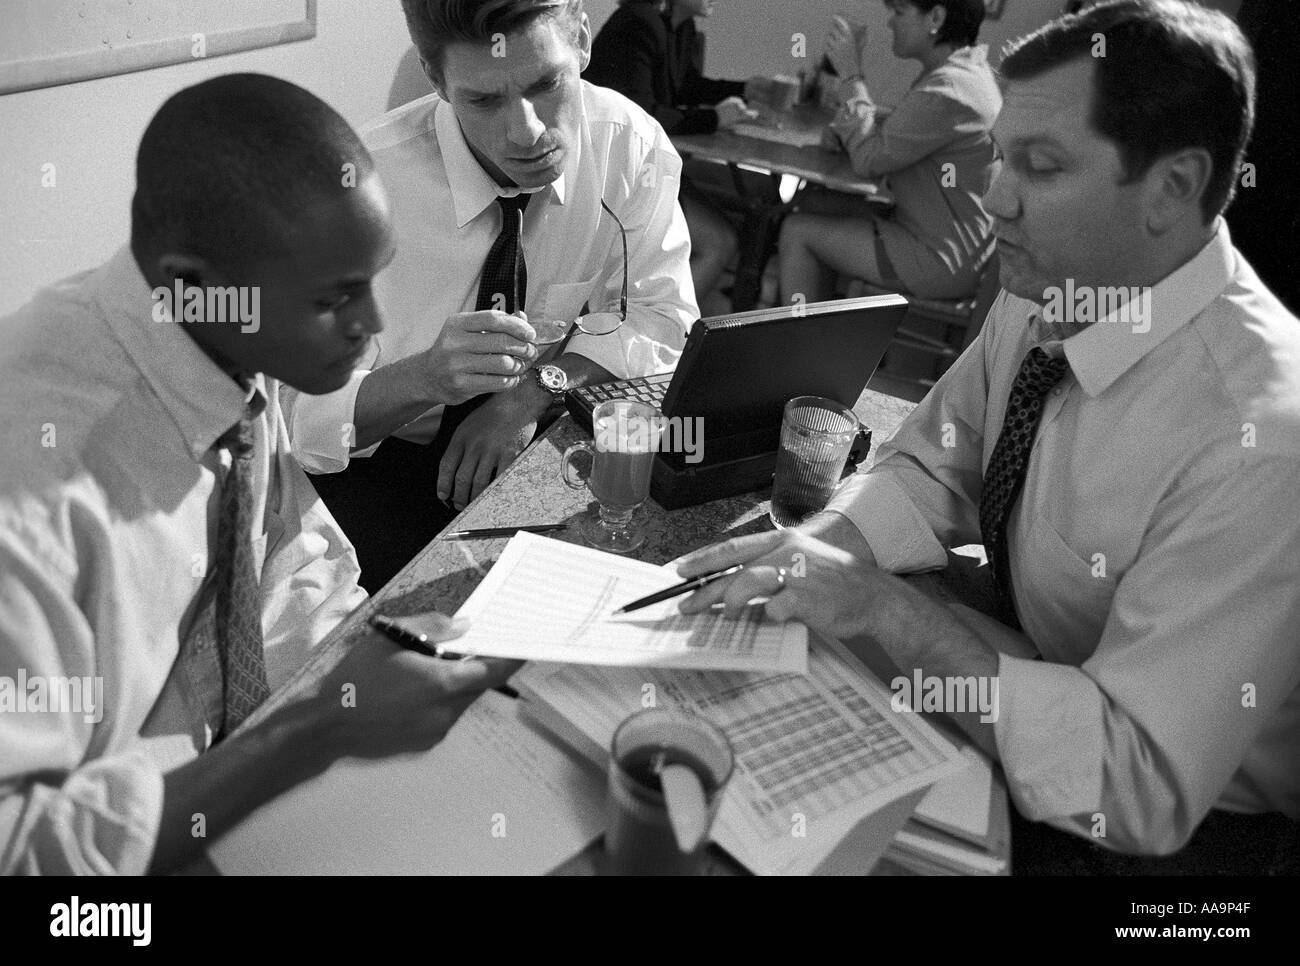 Group of business executives in a meeting Stock Photo